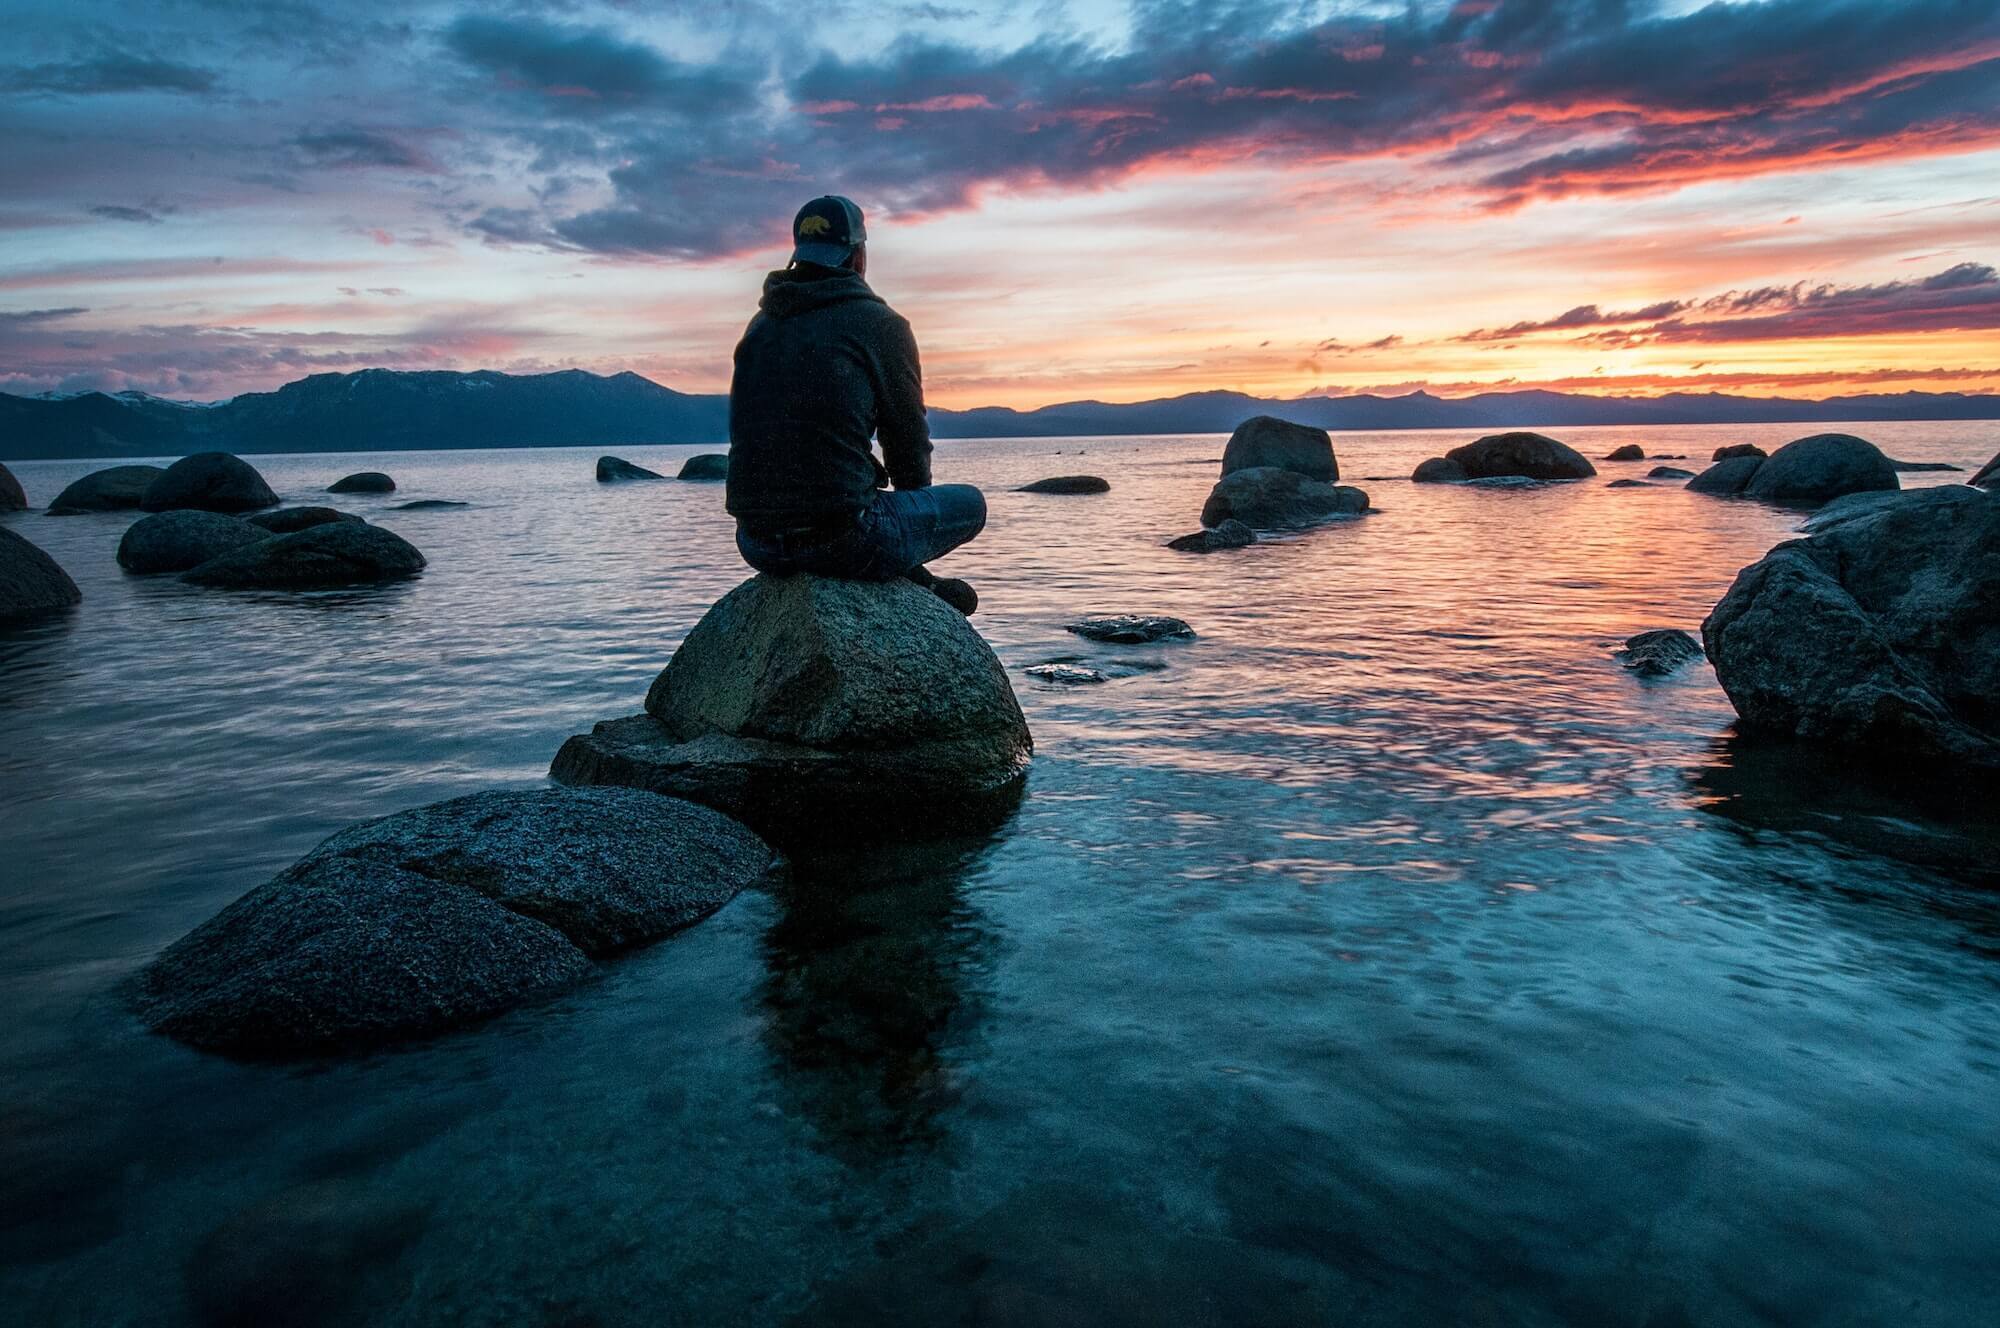 Man watching sunset sitting on rock surrounded by water